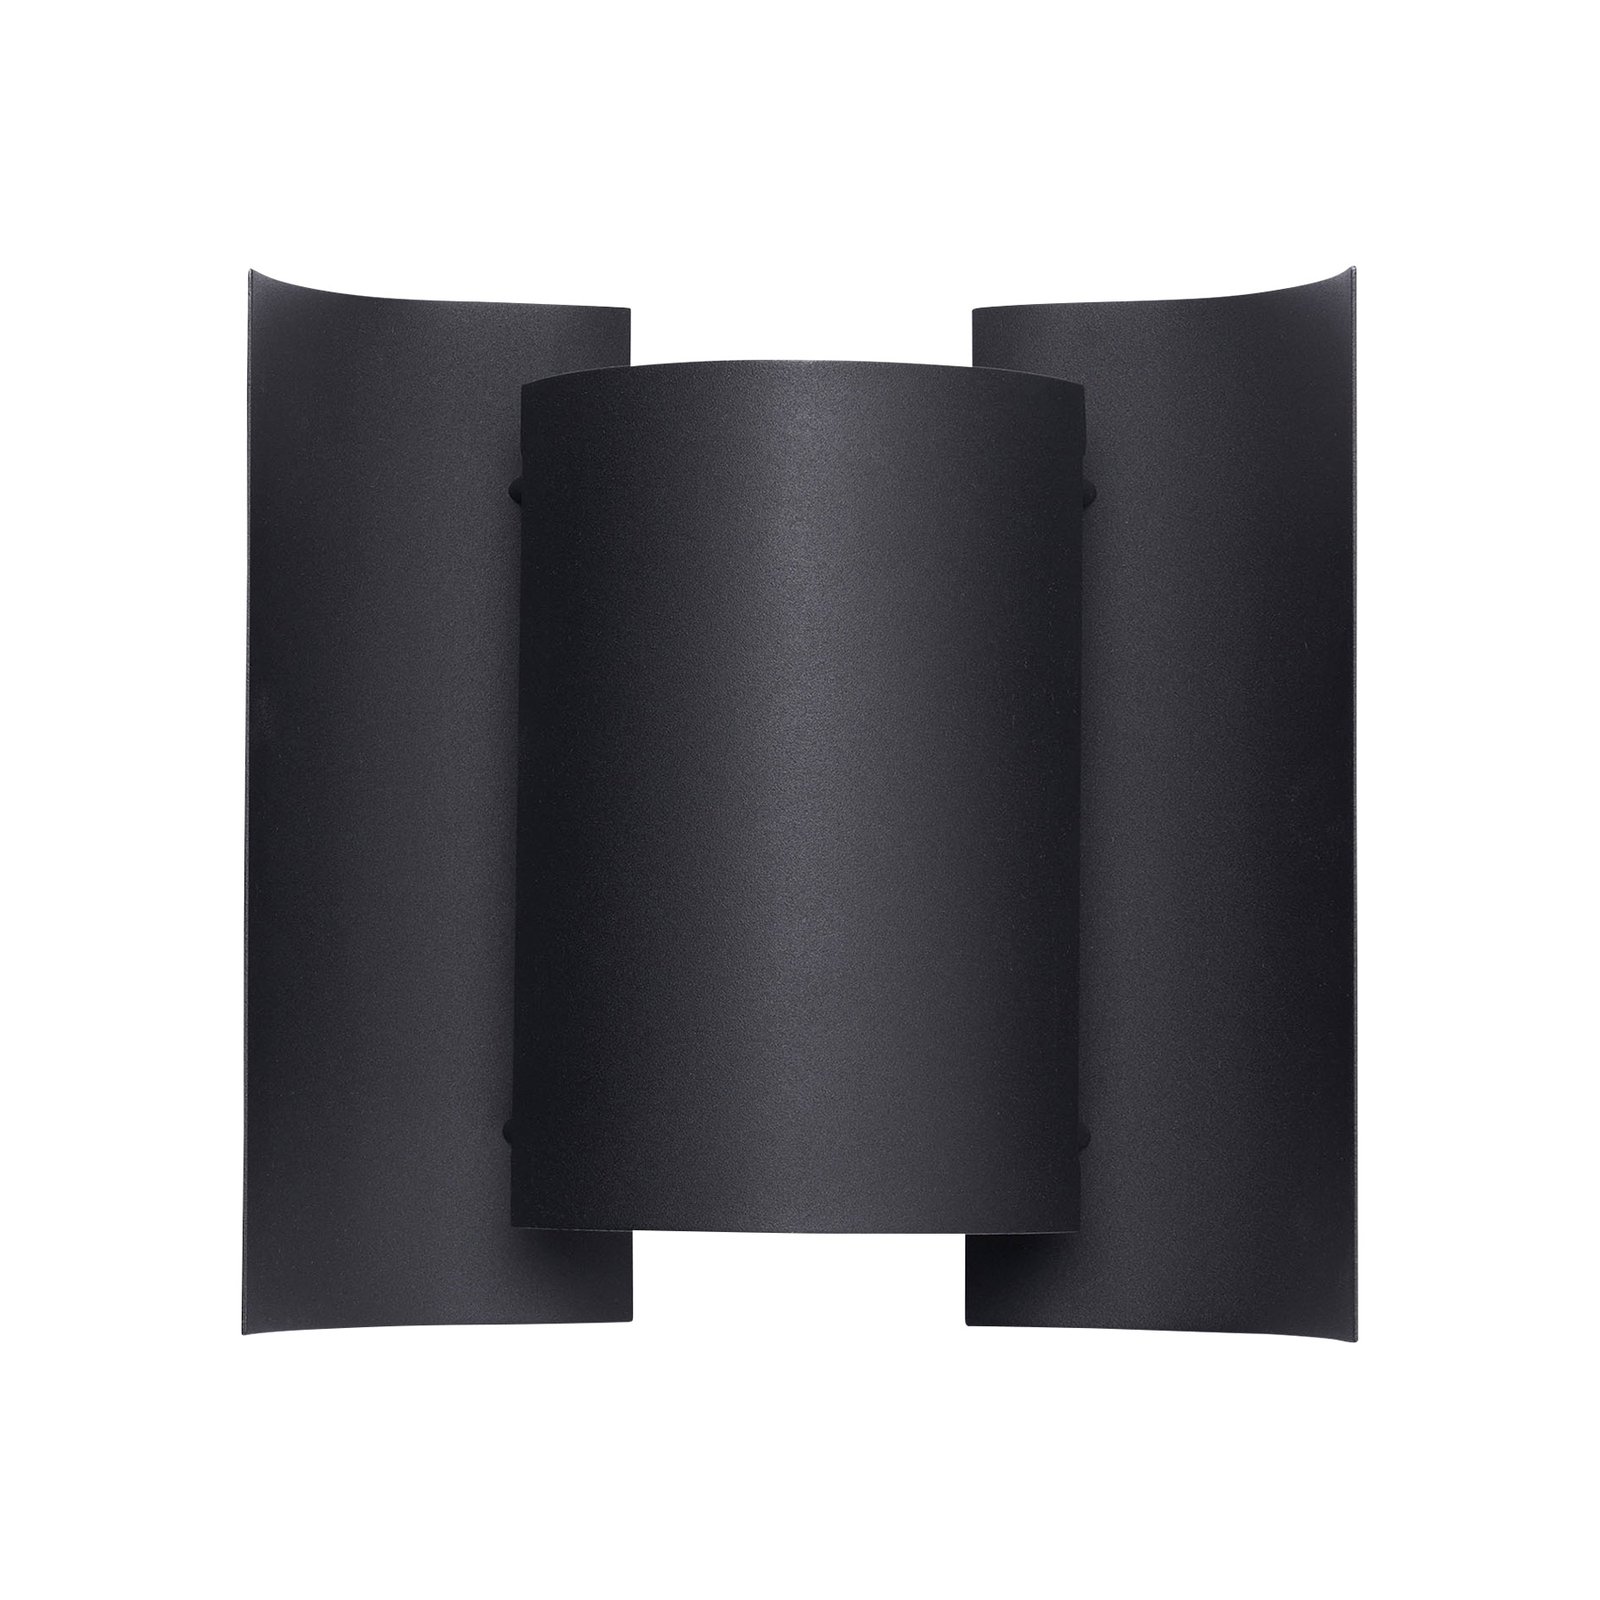 Northern Butterfly wall light, black